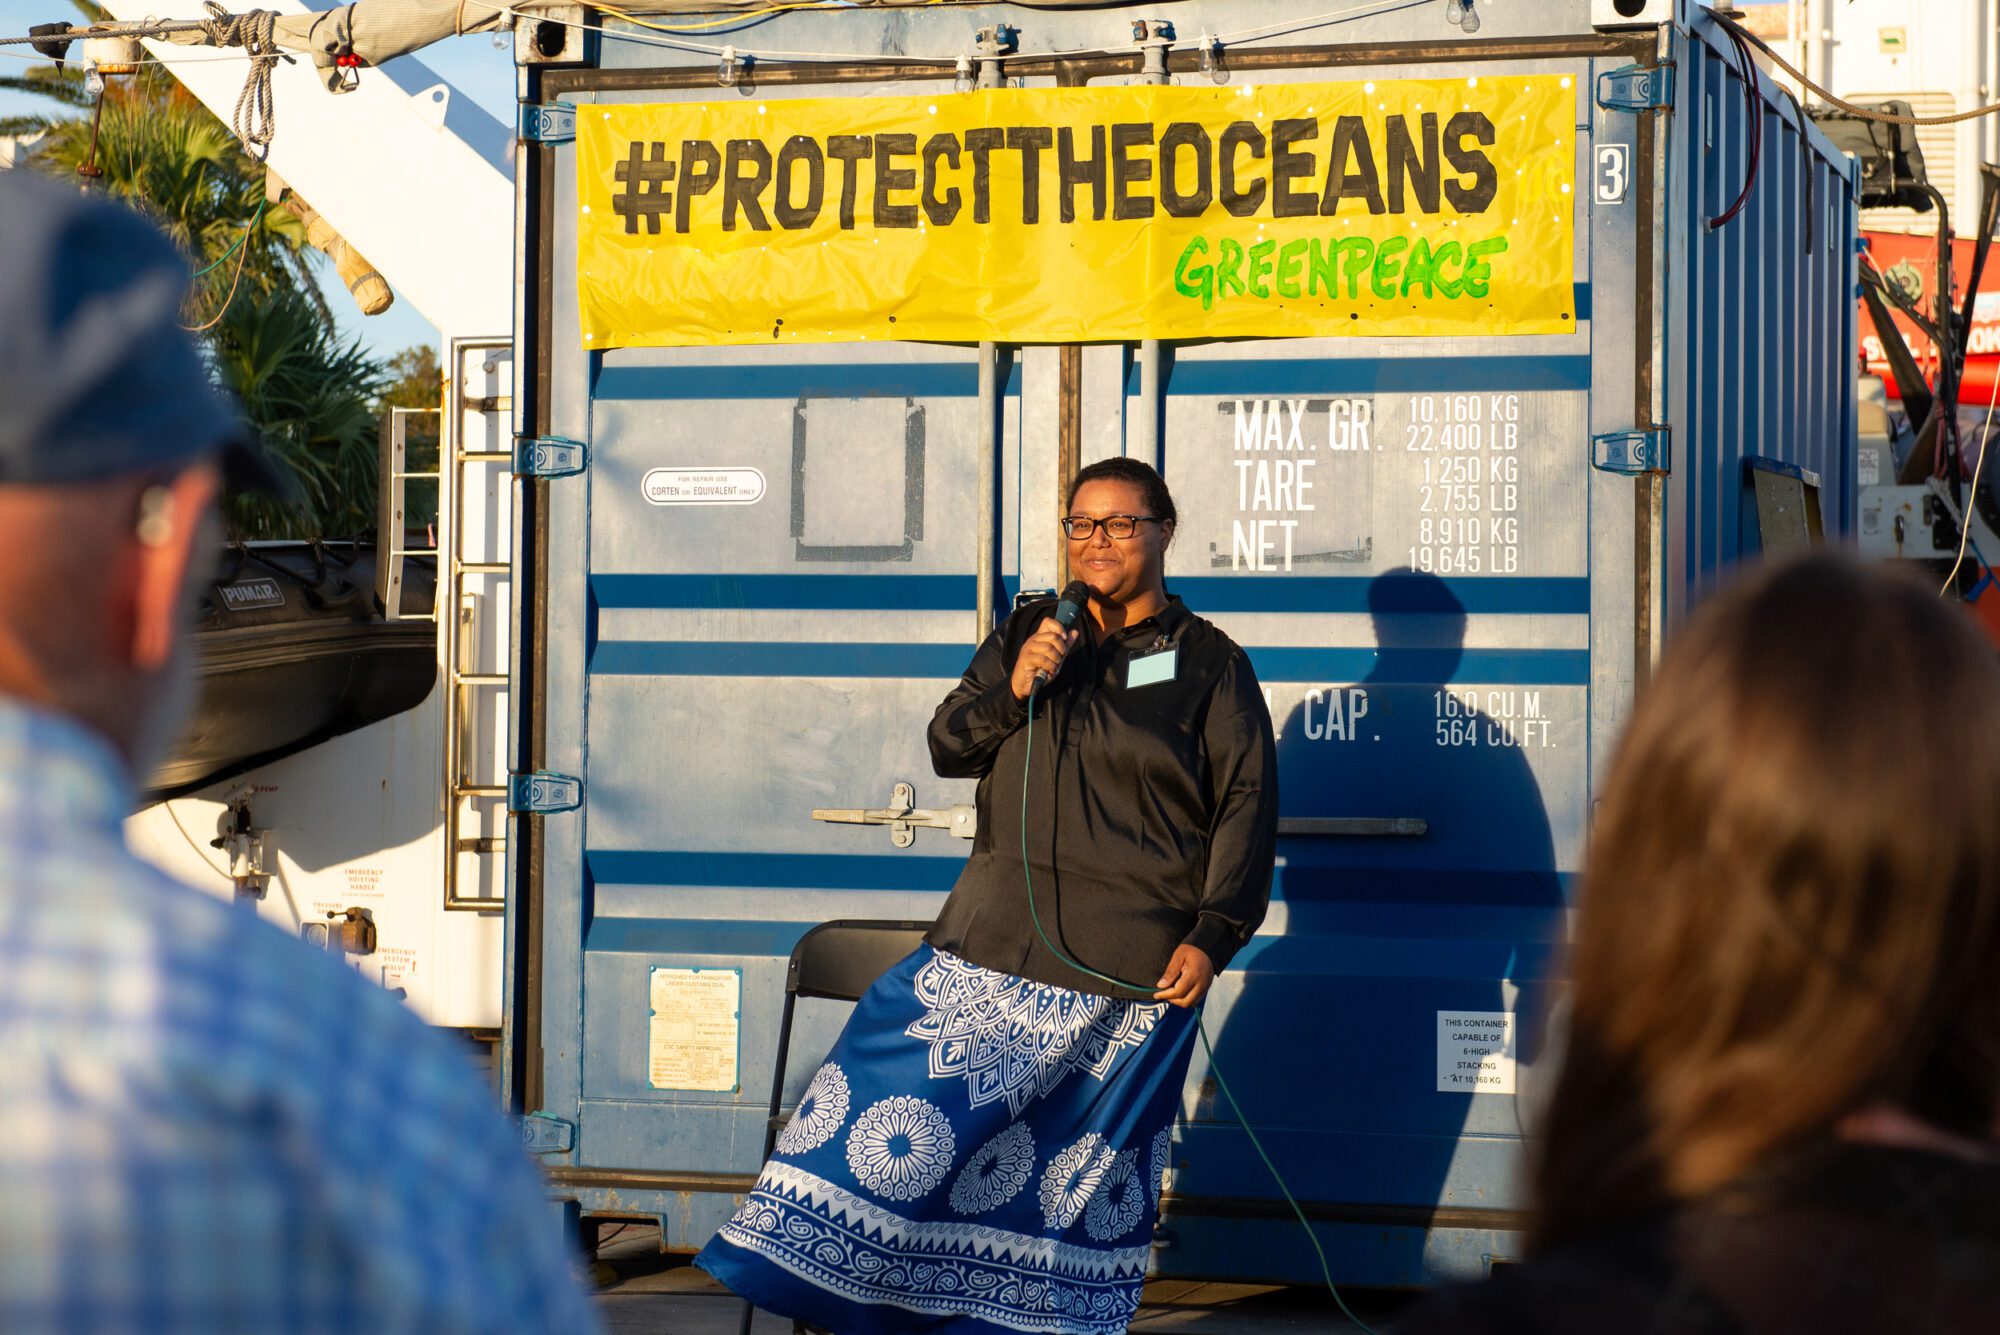 The author again holding a microphone in front of a blue metal container, with a yellow Greenpeace banner reading "Protect the Oceans" behind her, with a backs of a couple of audience members blurry in the foregroud